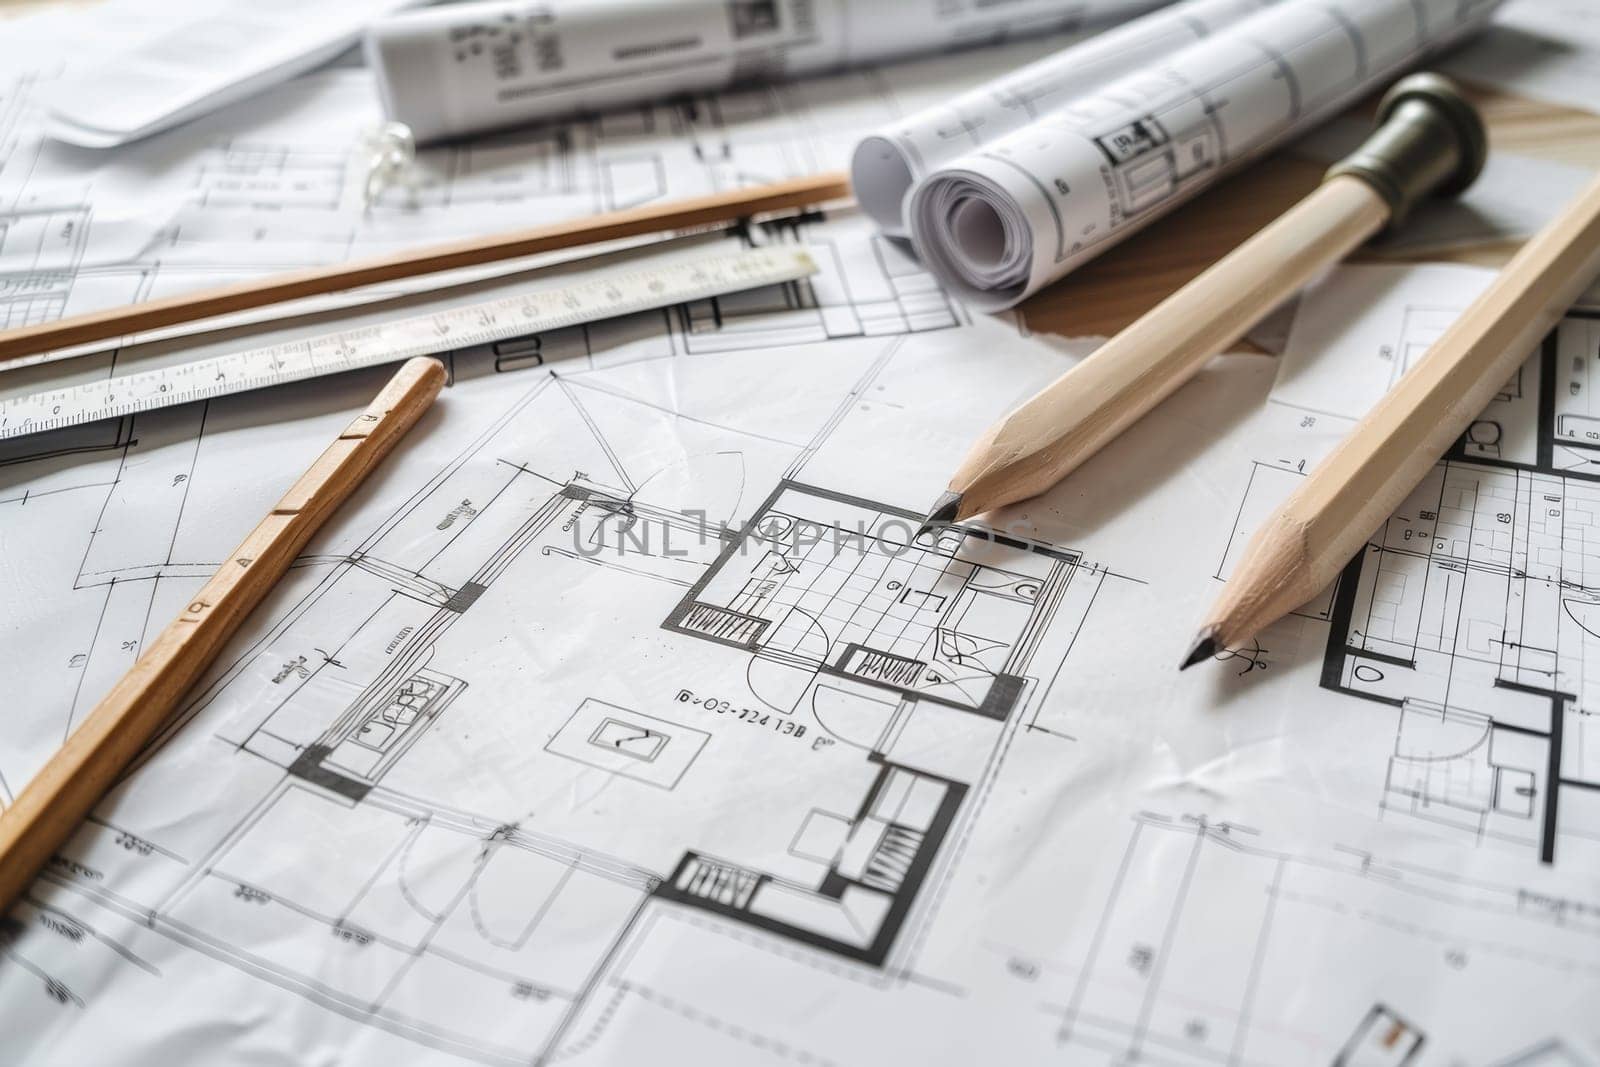 Architectural drawings and pencils are carefully placed on top of a blueprint, showcasing the creative process and design ideas for a renovation project.